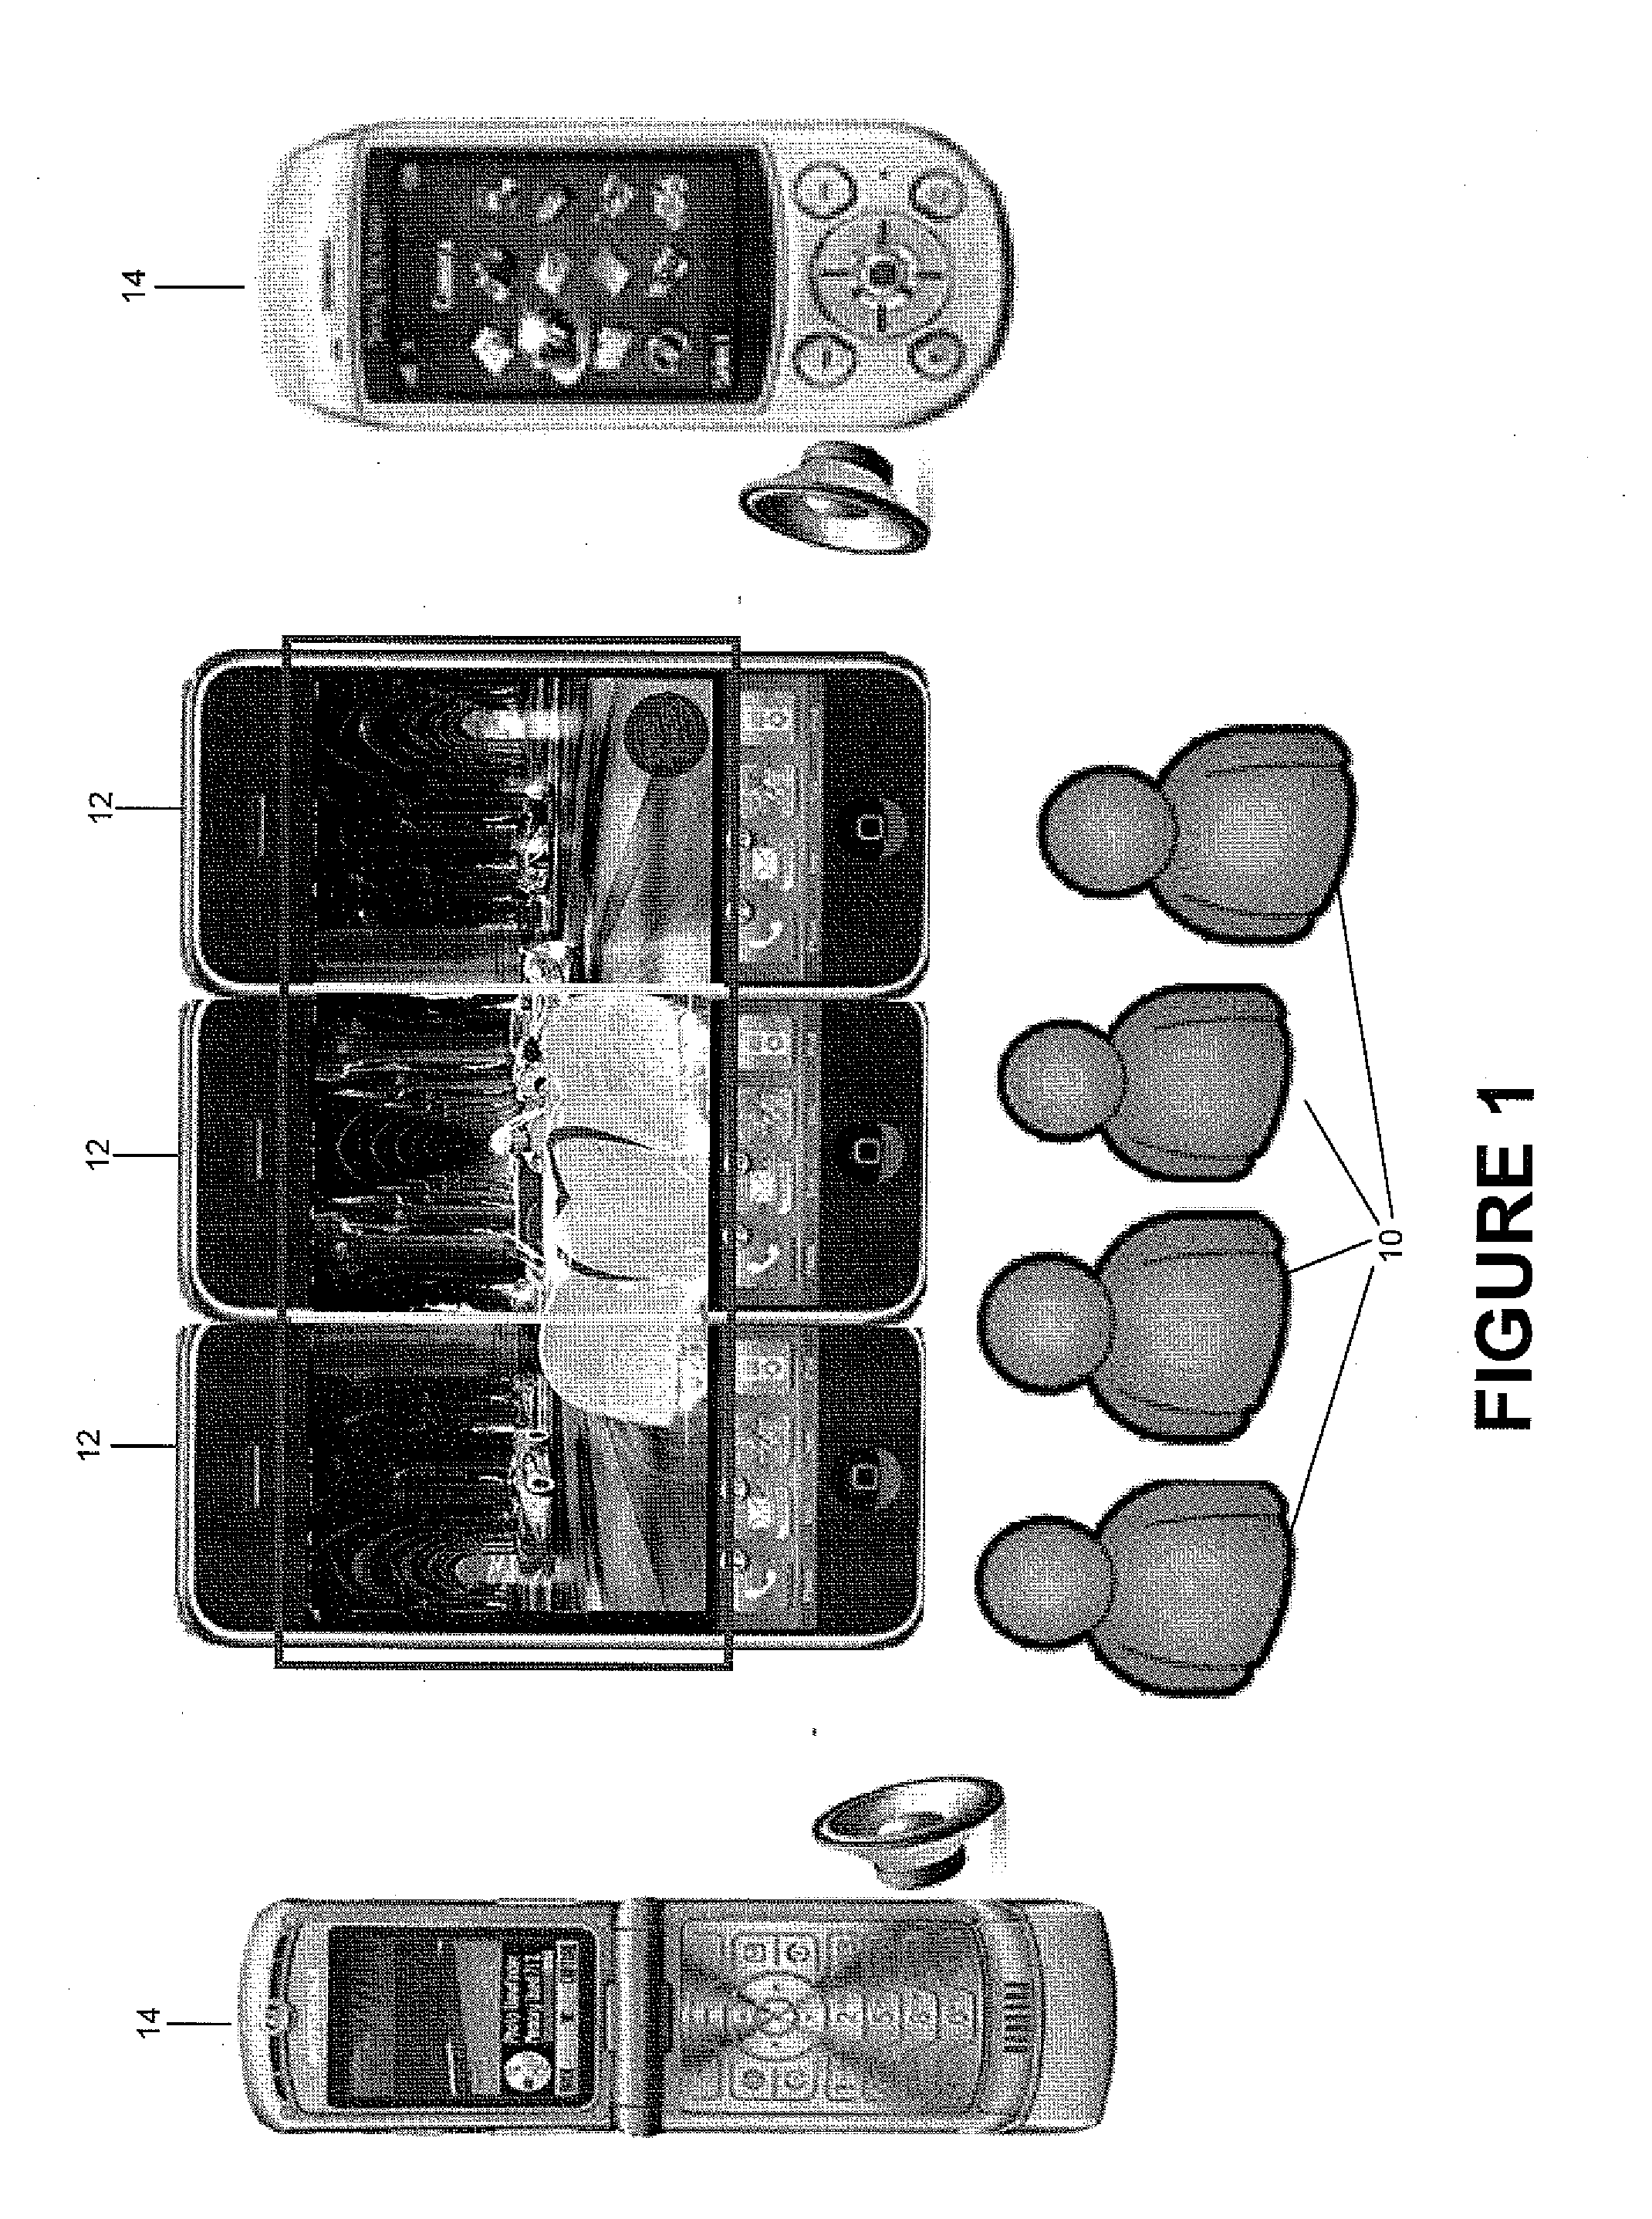 Method and system supporting mobile coalitions